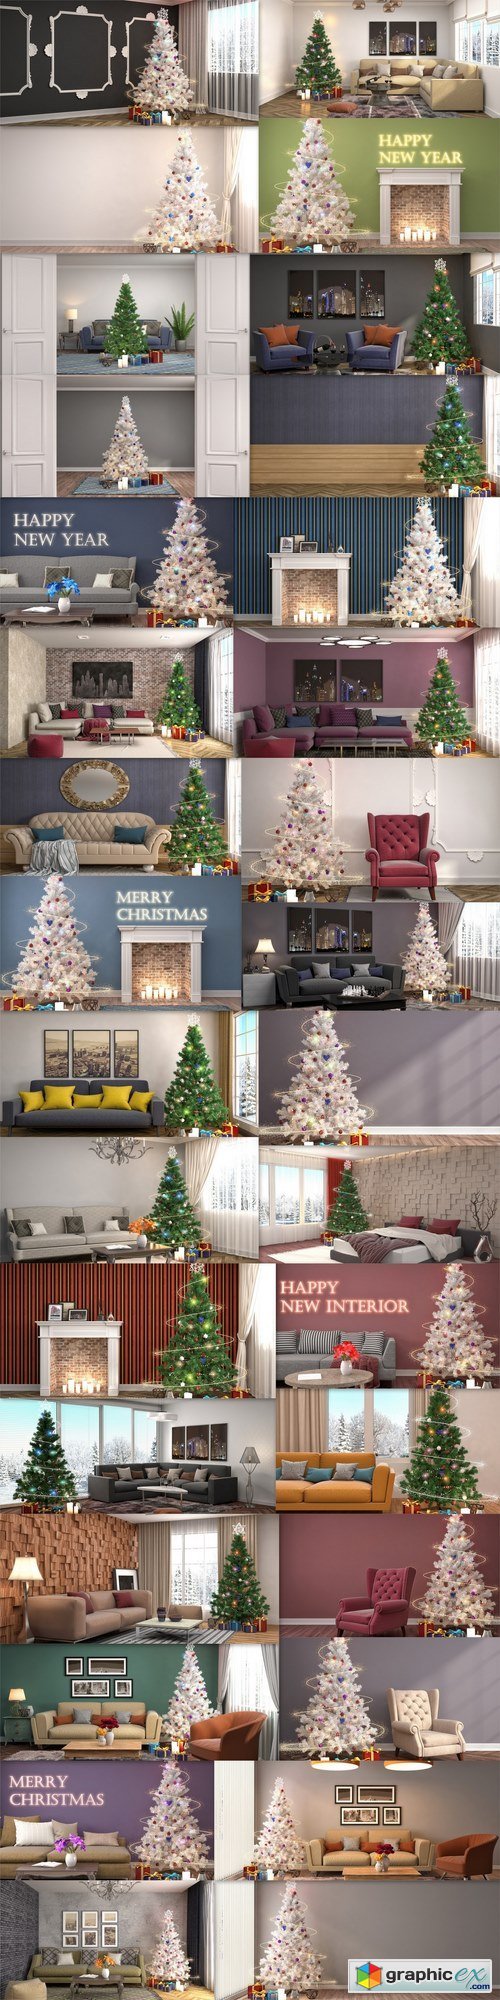 Homemade Christmas design apartments, rooms, houses 5